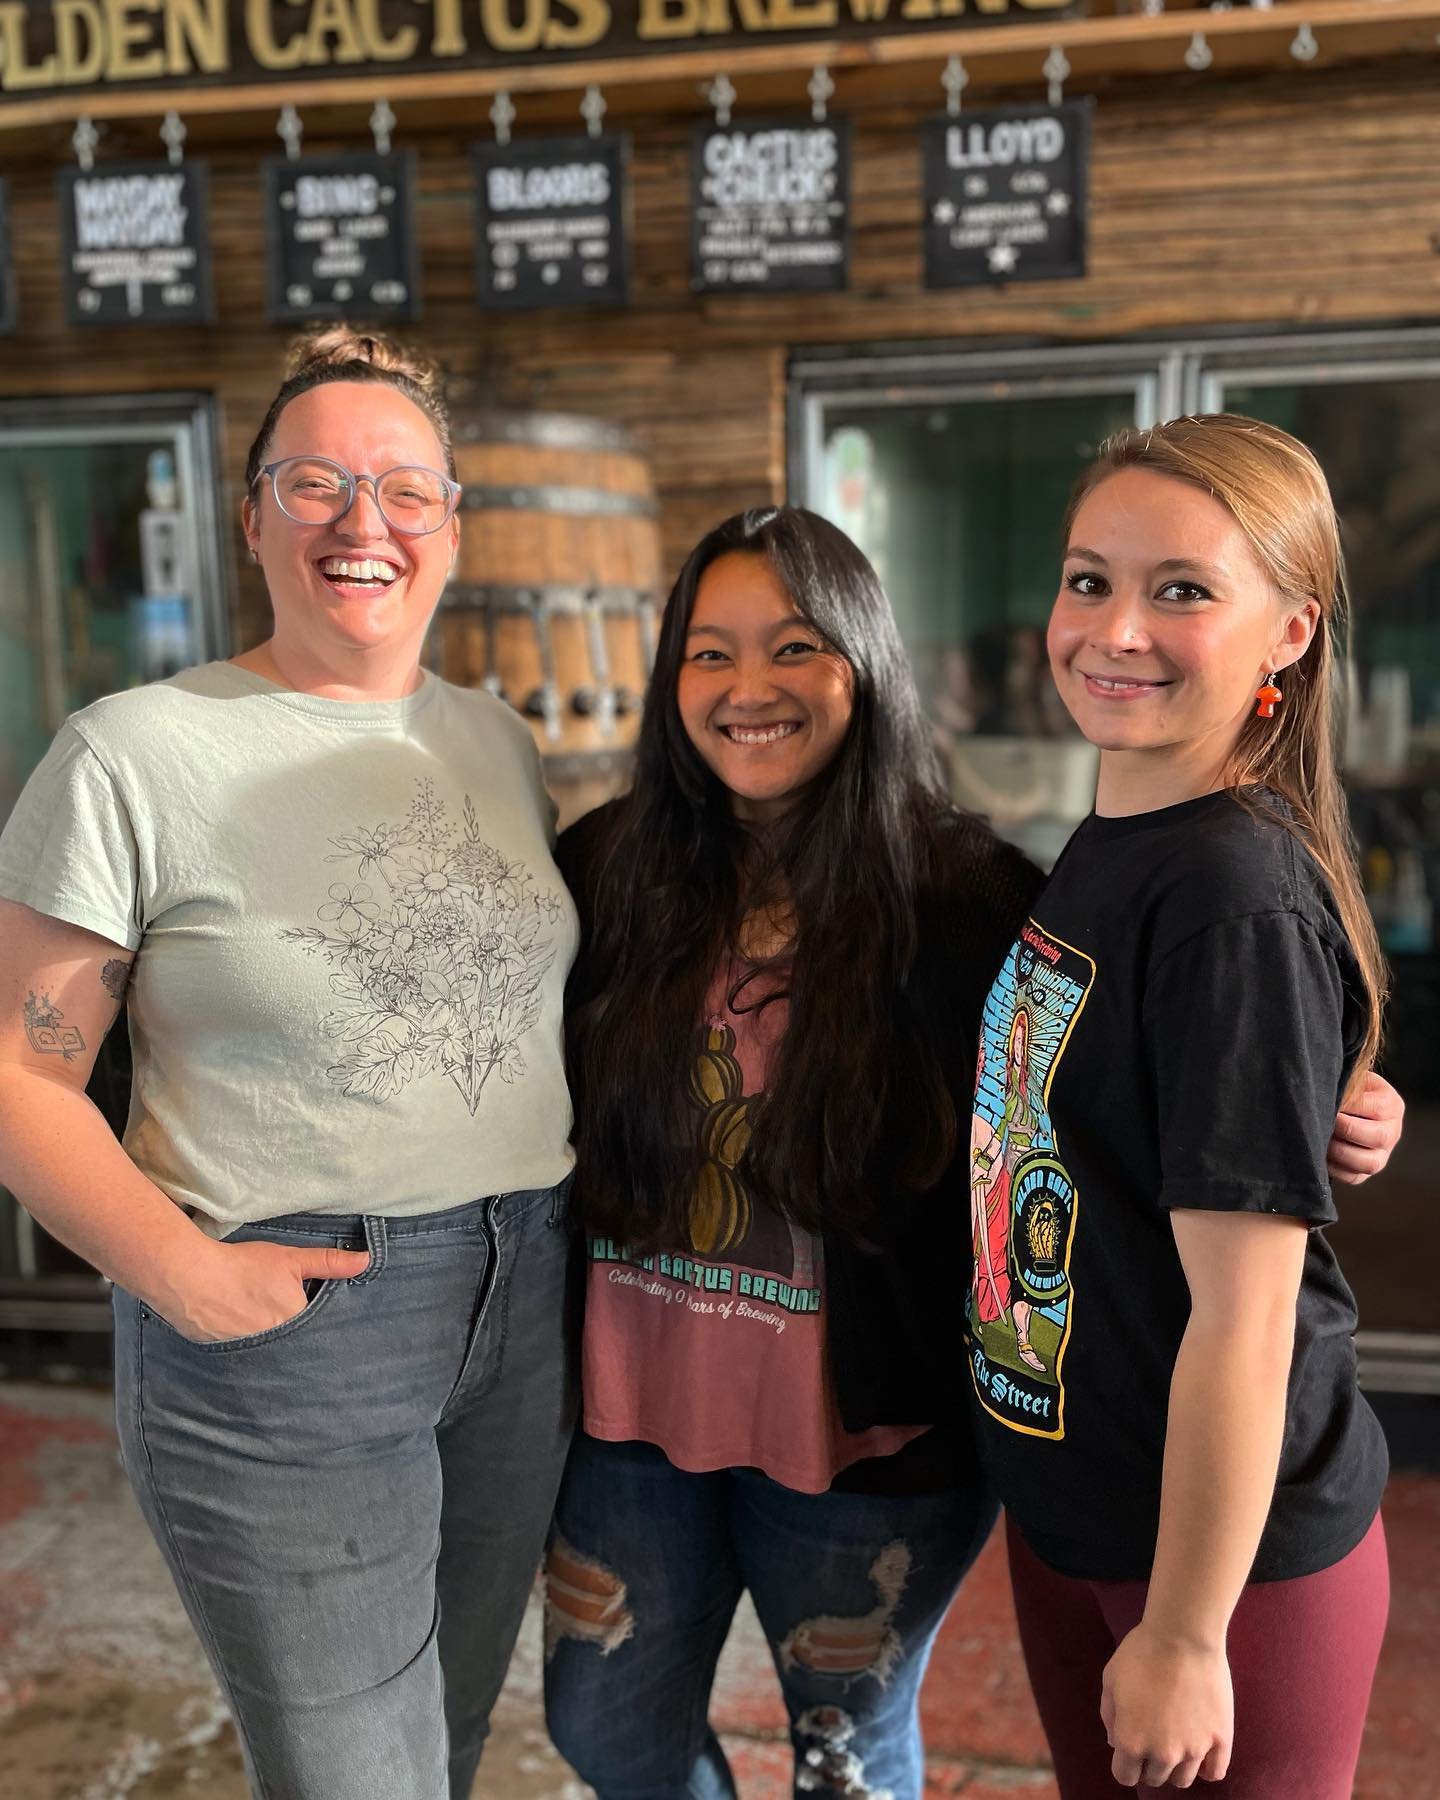 These three Bad Ma&rsquo;ama Jamma&rsquo;s couldn&rsquo;t be any more badass!  We&rsquo;re so happy to have them on staff, and we couldn&rsquo;t do what we do without them. Not pictured but shout out to the best step mom we know @floggingsmolly 💕 Ha